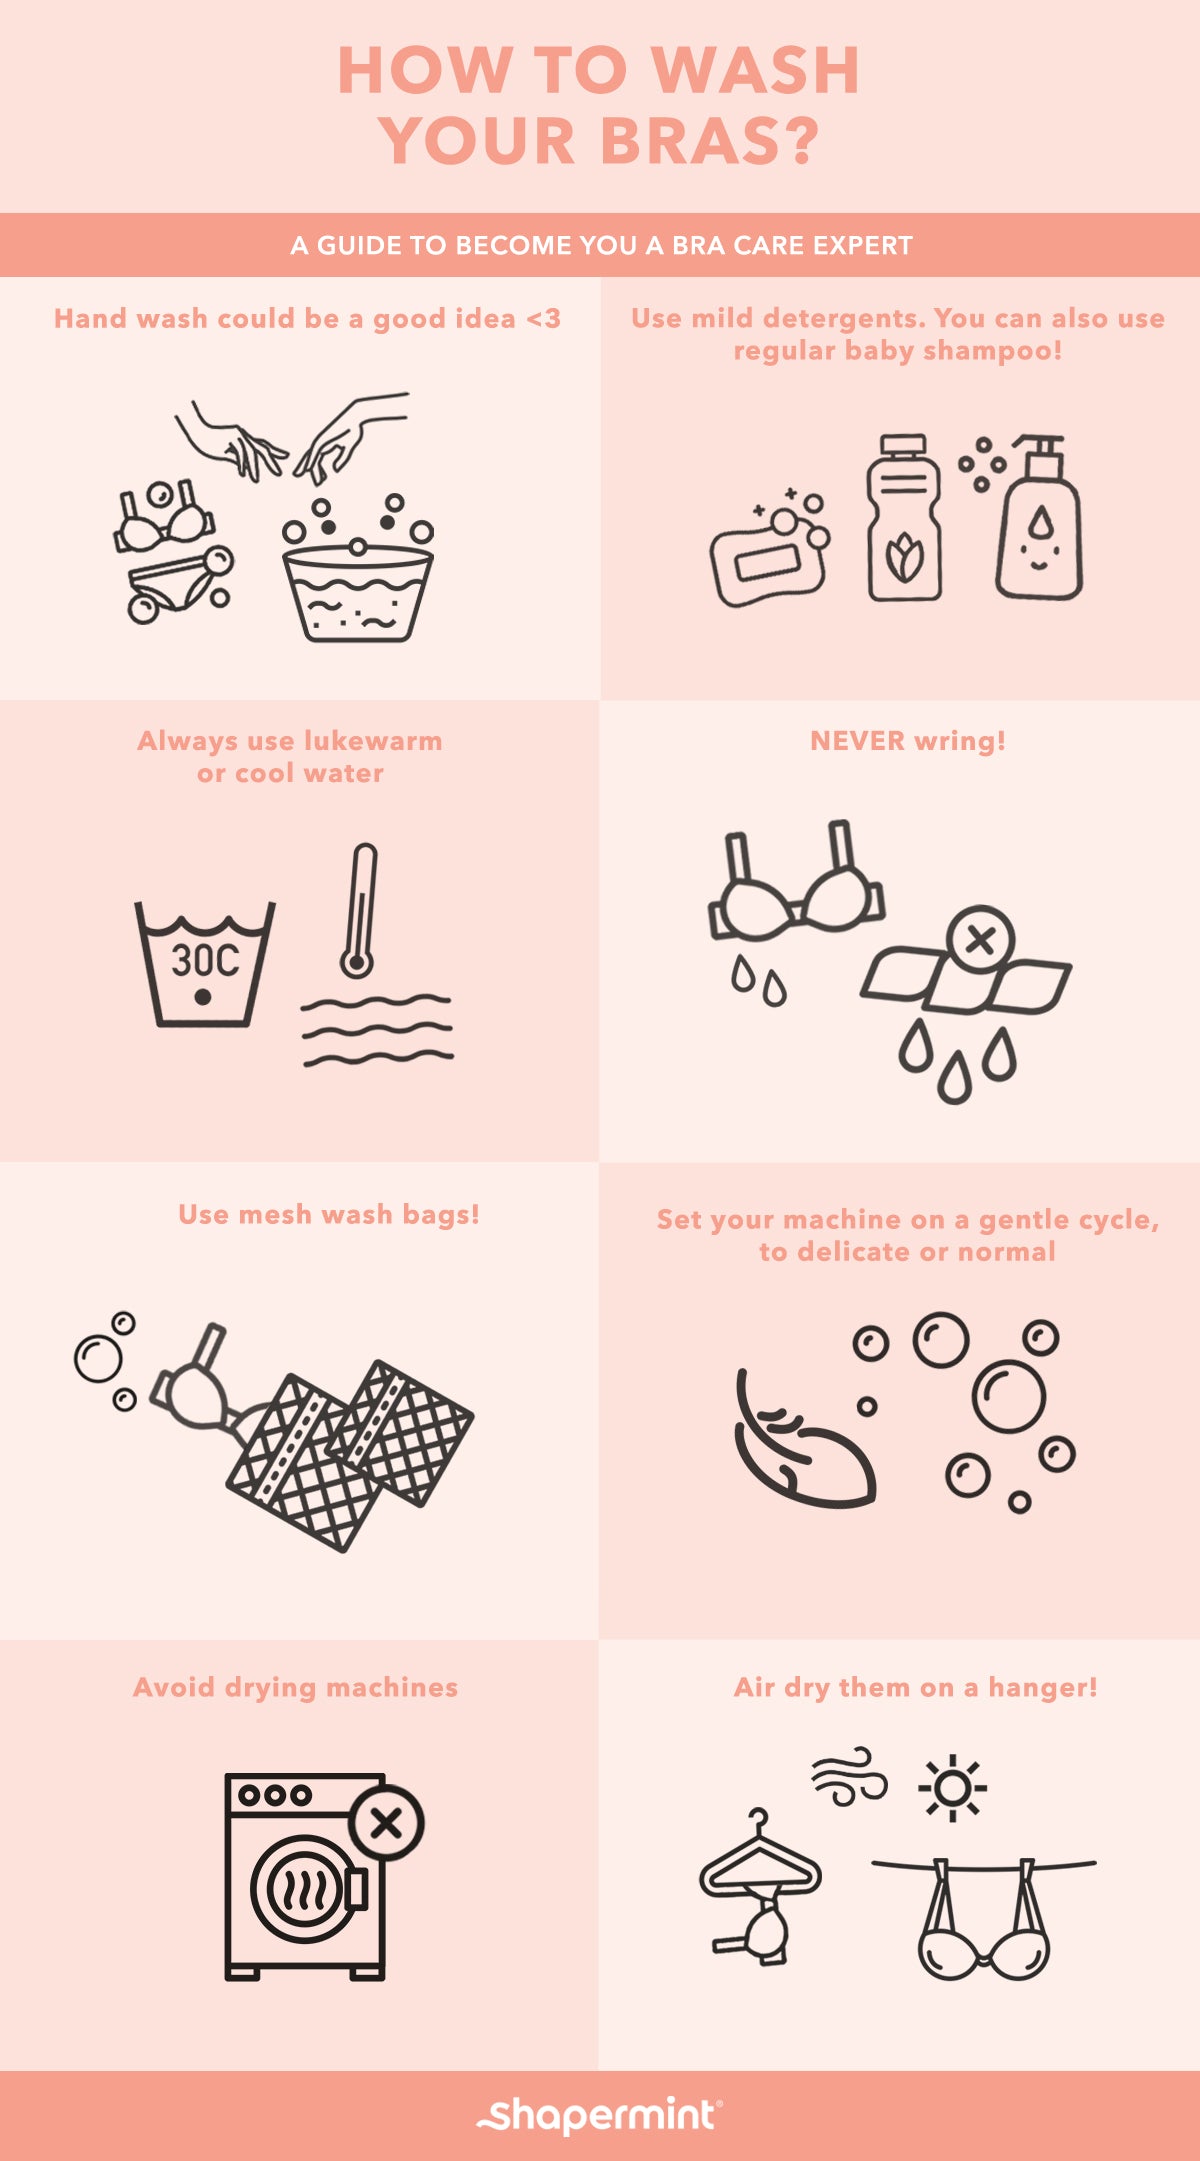 How to Wash Your Bras